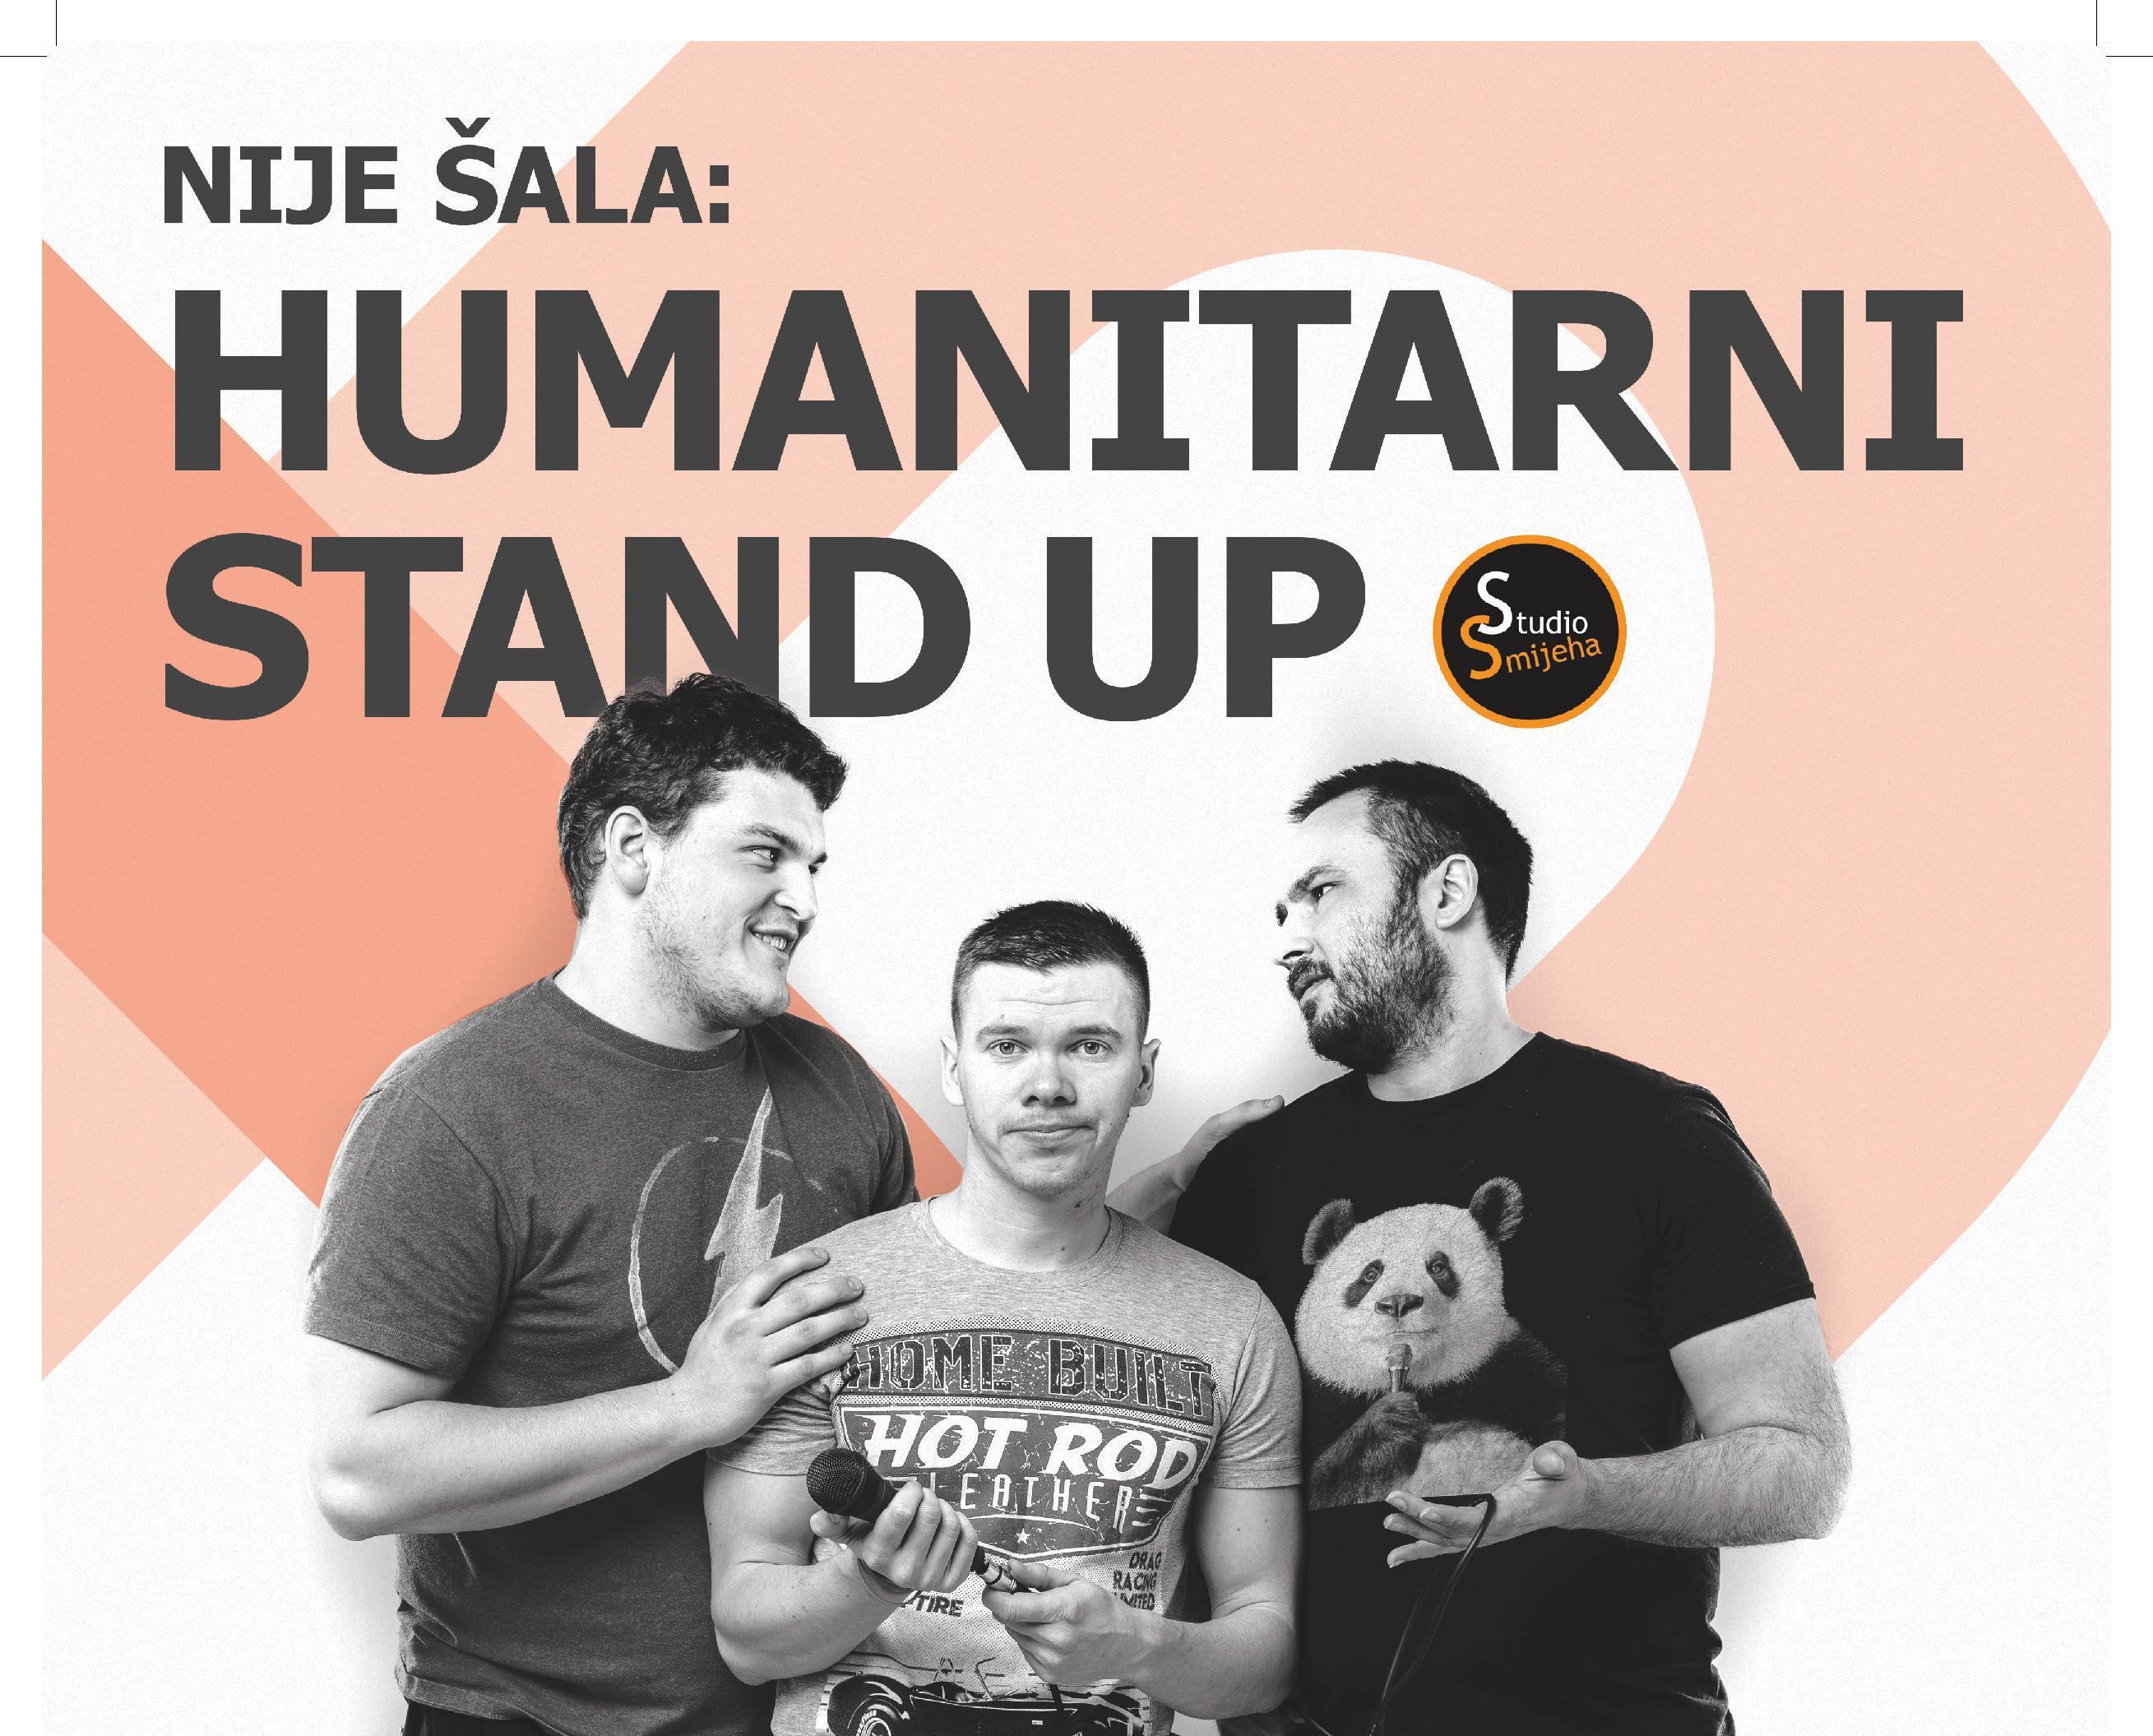 Humanitarian Stand up Show "When laughter is saving lives"